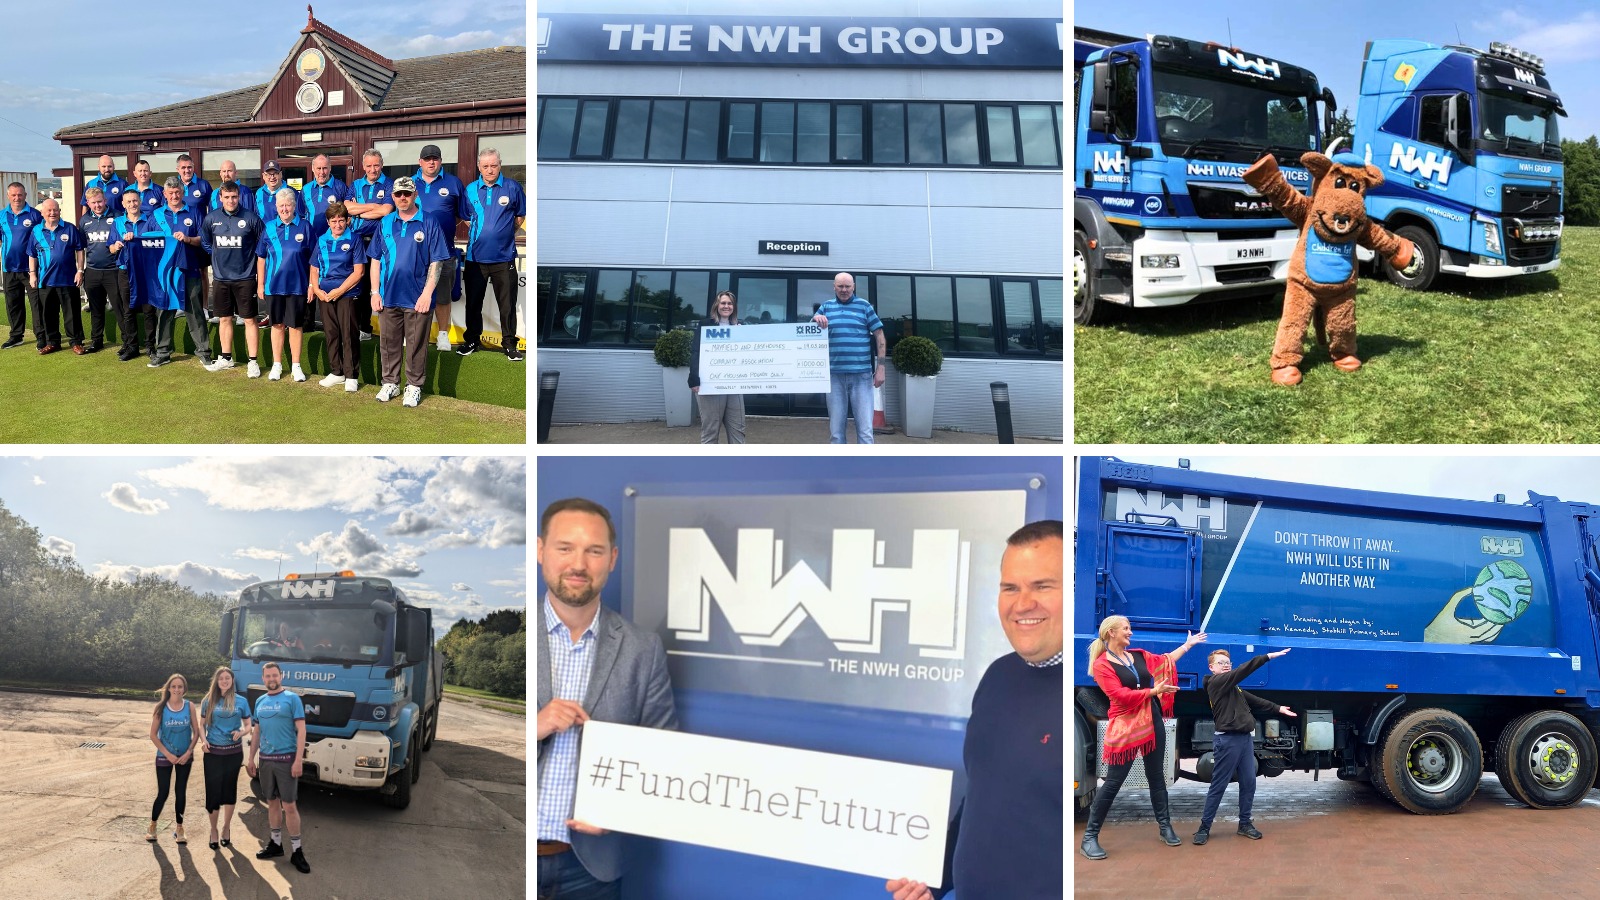 NWH Group Re-Launches £21,000 Annual Community Support Initiative